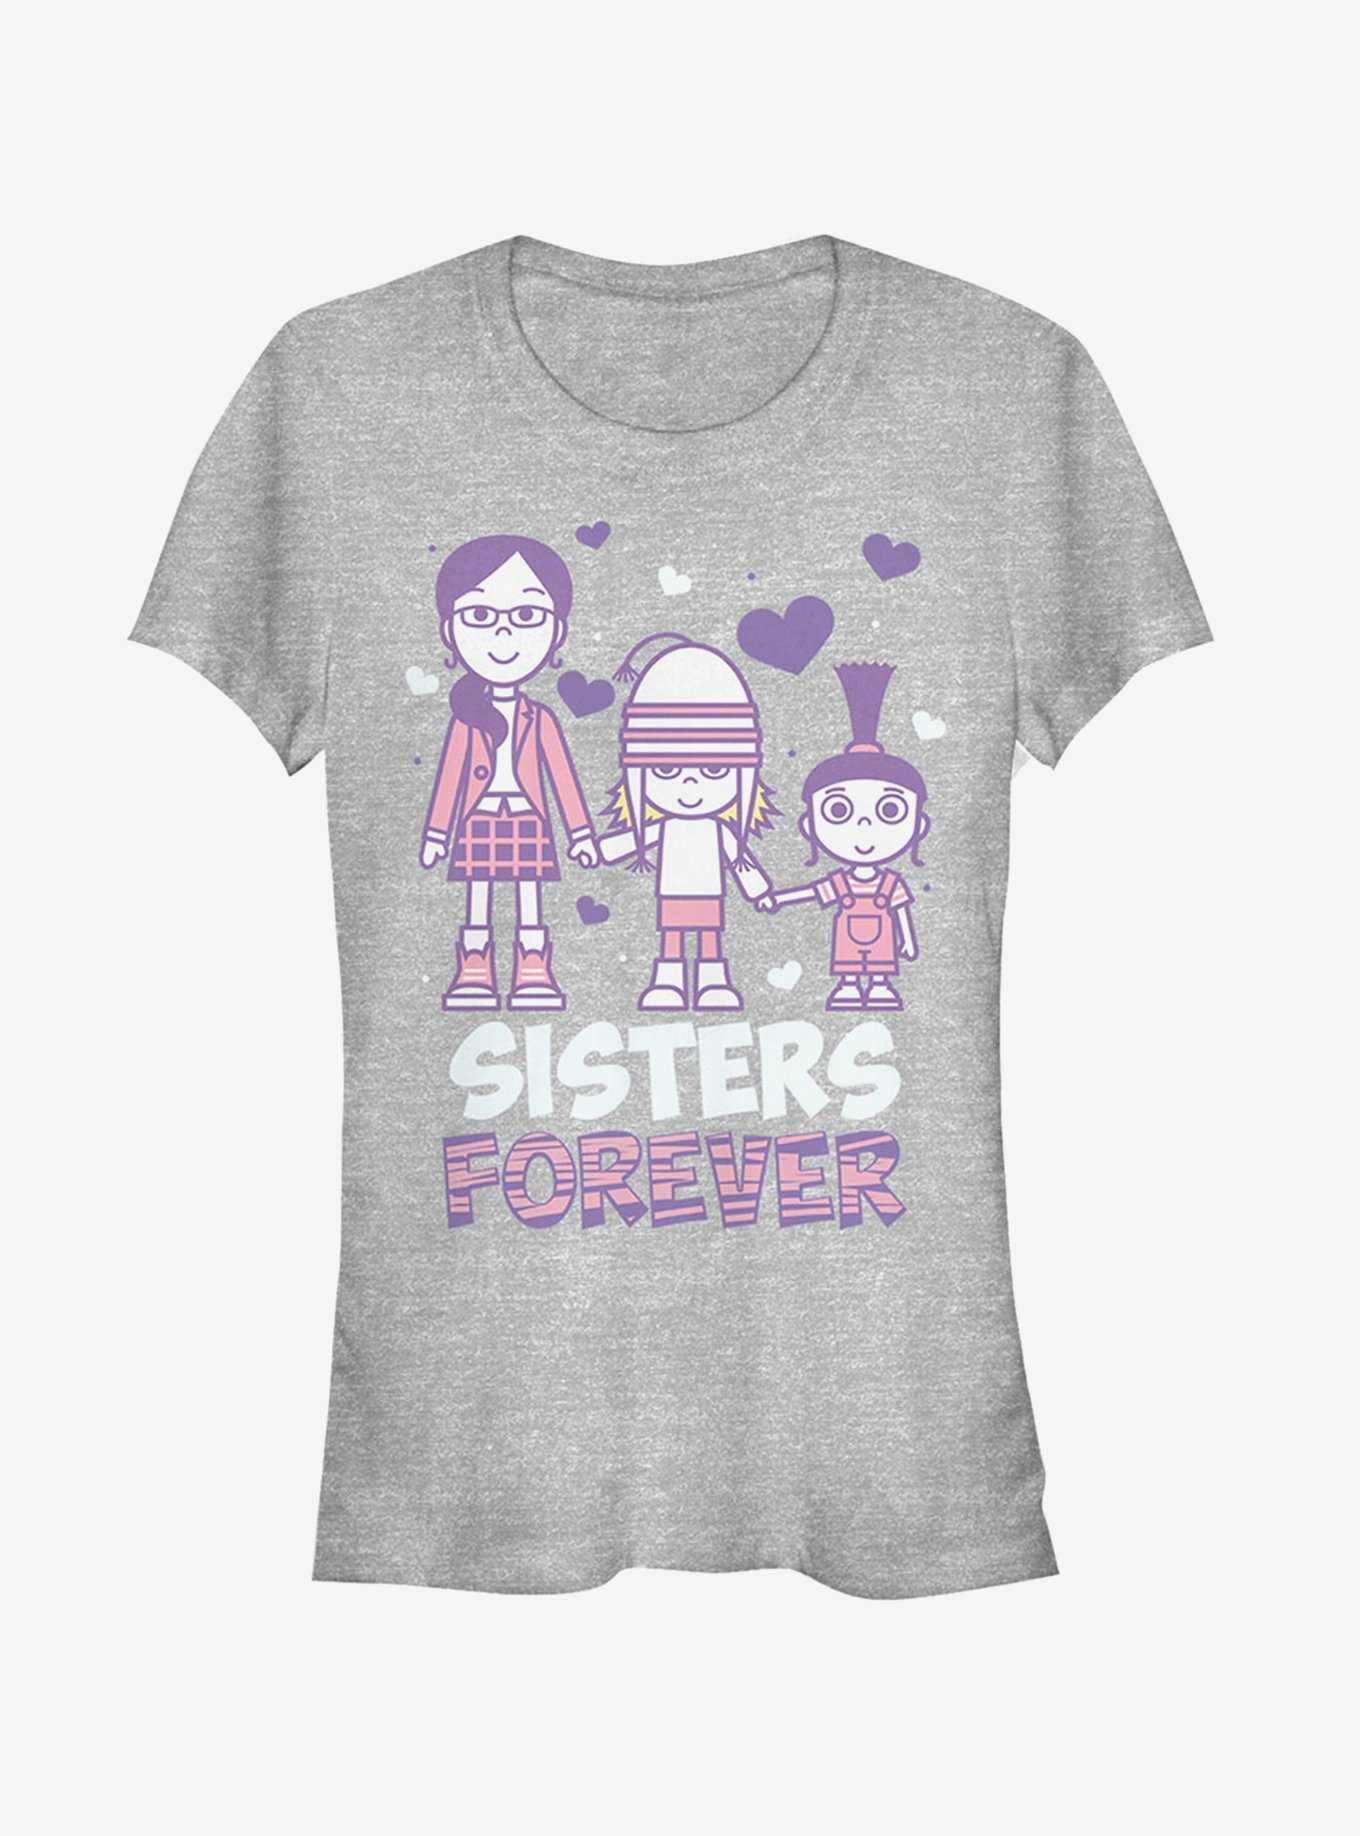 Despicable Me Sisters Forever Girls T-Shirt, , hi-res